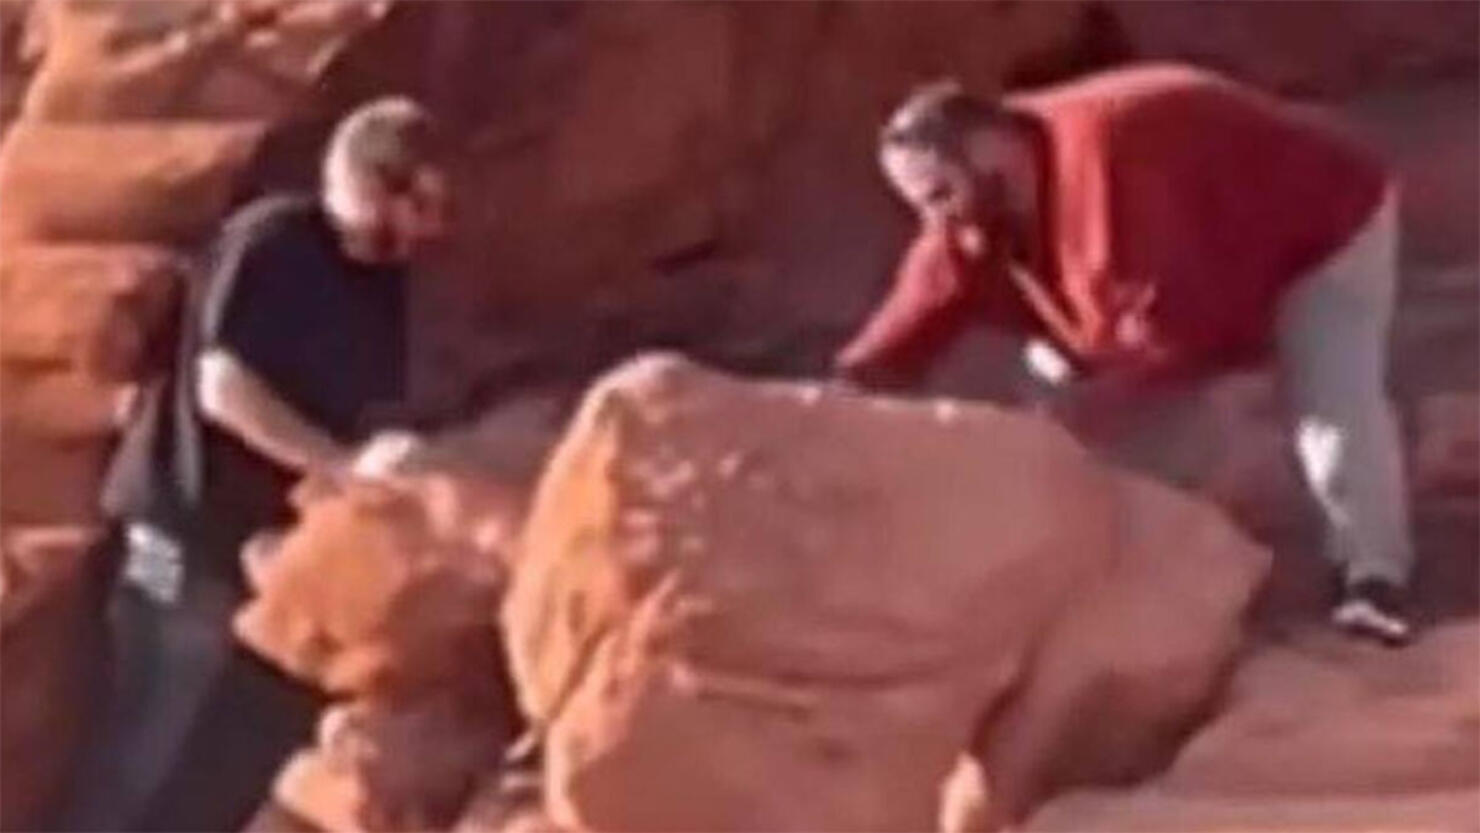 Two men topple ancient rock formations